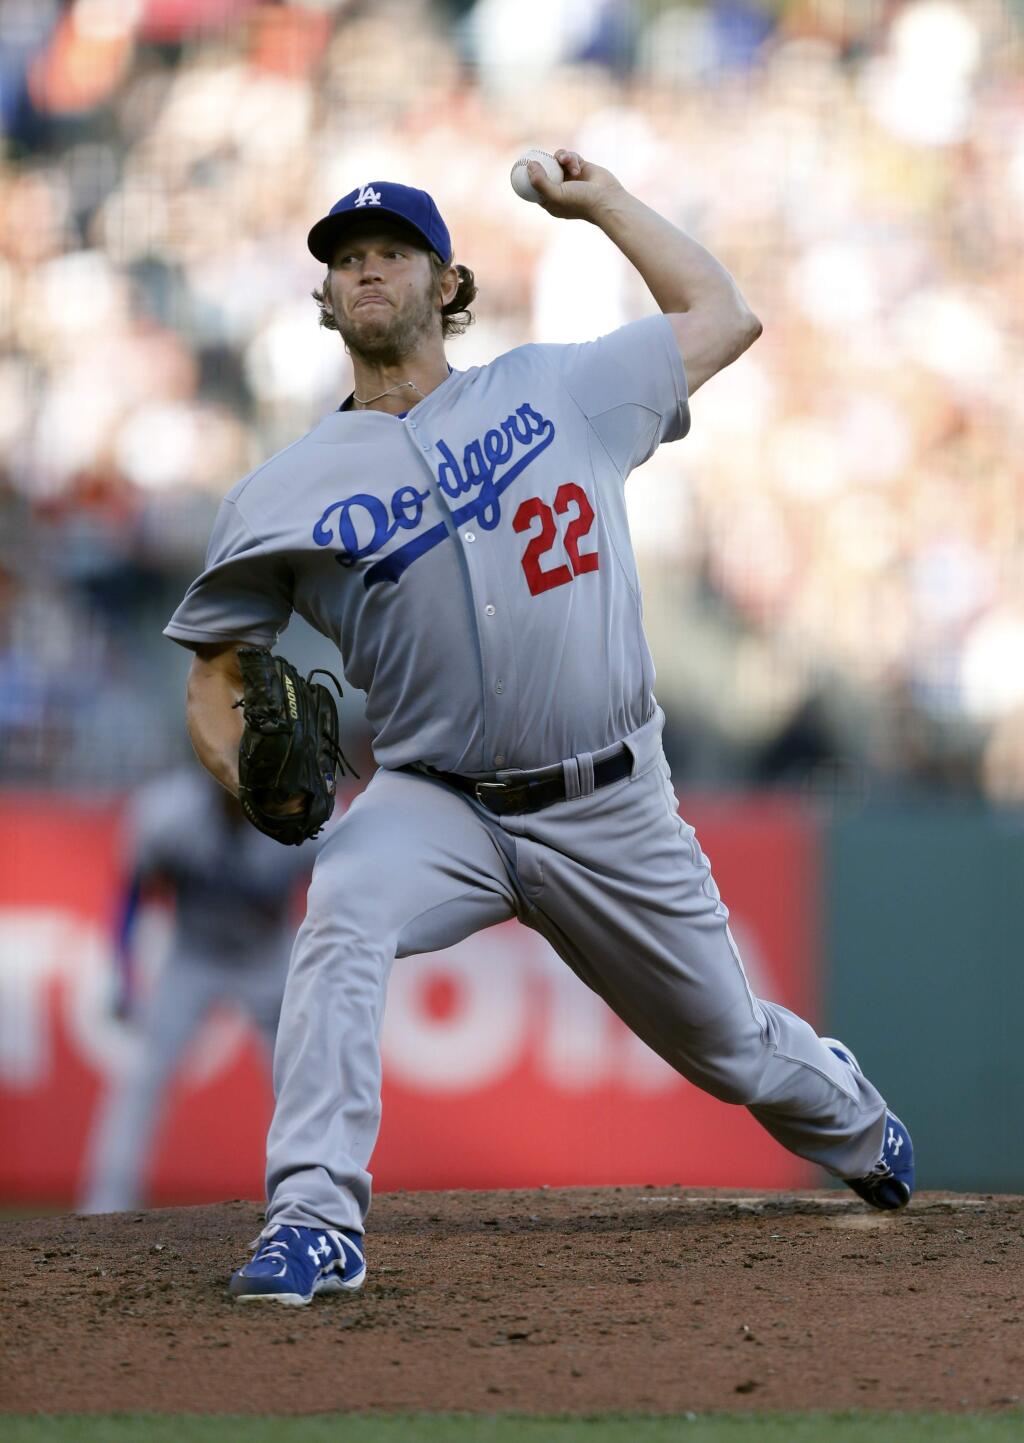 Los Angeles Dodgers starting pitcher Clayton Kershaw winds up during the third inning of a baseball game against the San Francisco Giants, Saturday, July 26, 2014, in San Francisco. (AP Photo/Beck Diefenbach)